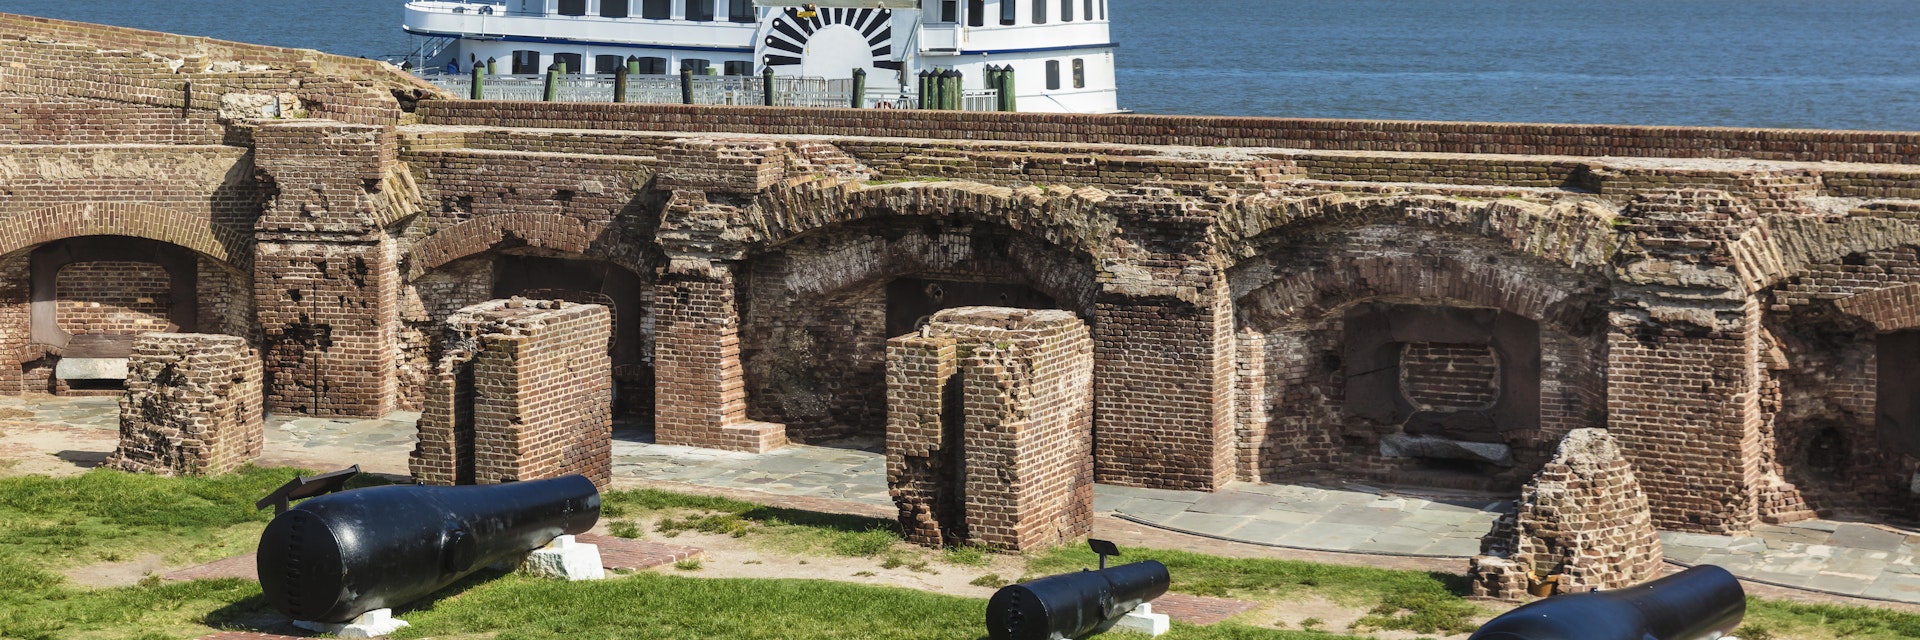 Two 15 inch 50,000-pound Rodman canons (on the sides), the largest guns used in the Civil War, are on display at the Fort Sumter site in Charleston, South Carolina.